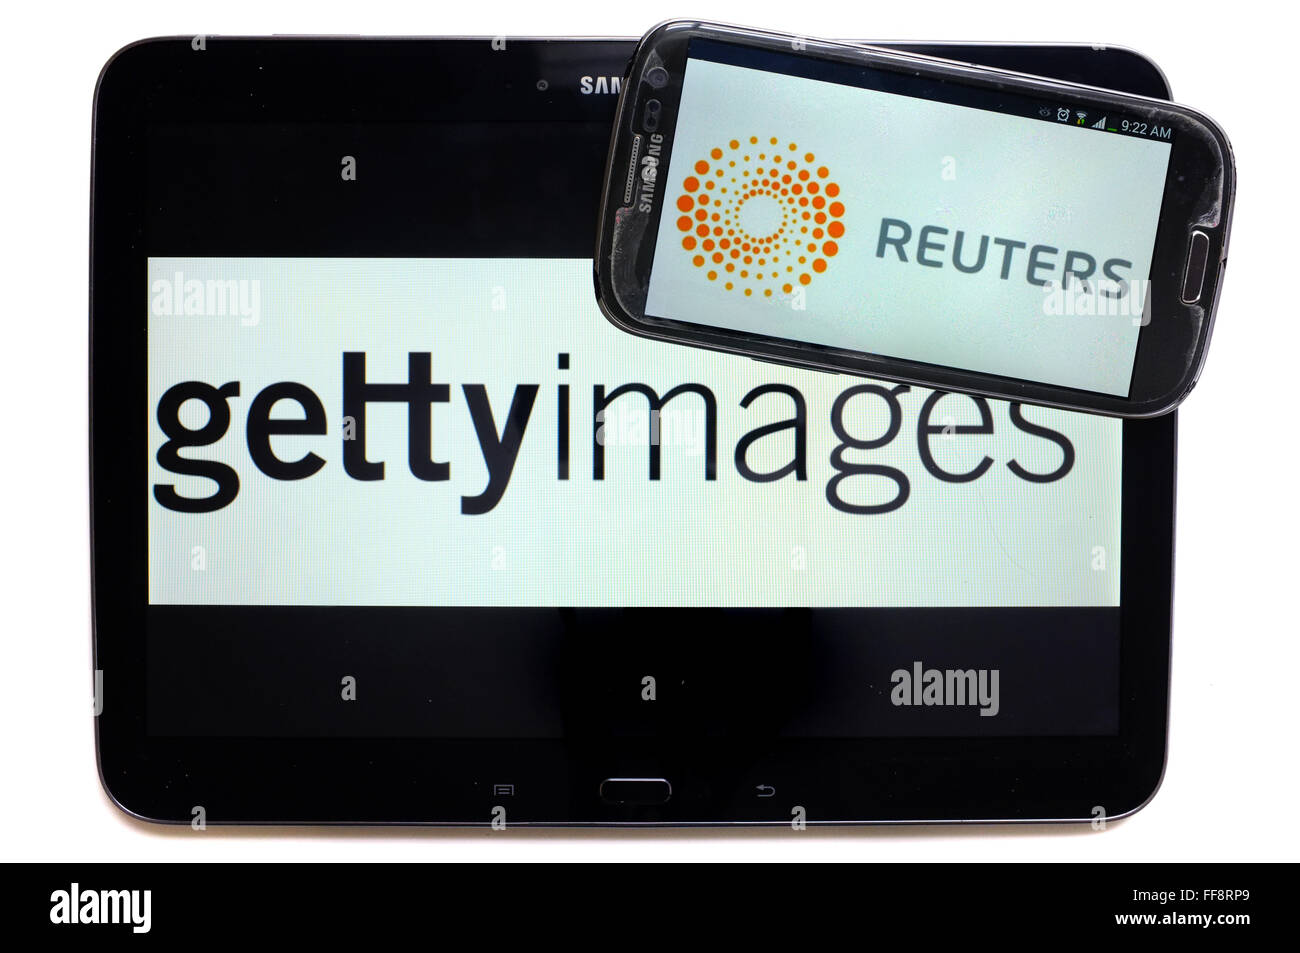 The news agencies getty images and Reuters on the screens of a tablet and a smartphone photographed against a white background. Stock Photo